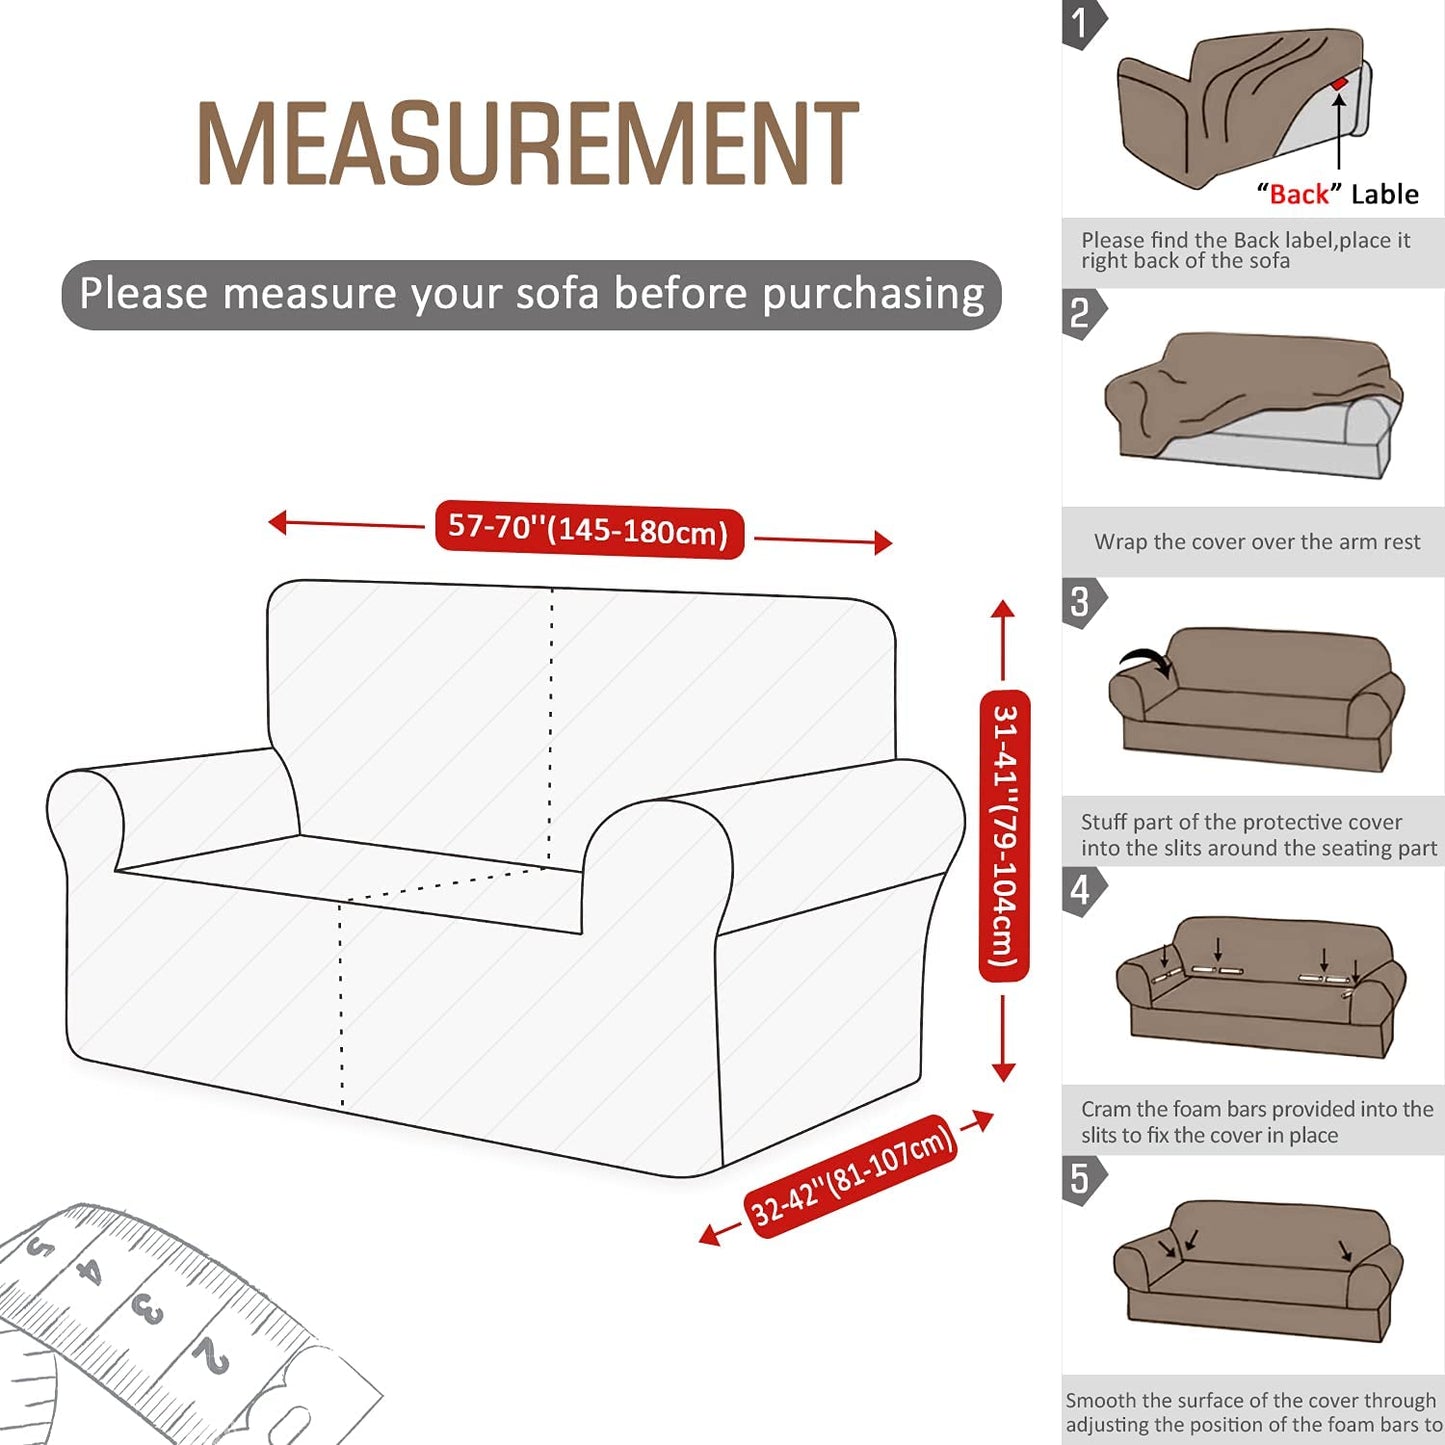 Sofa Covers 2 Seater, Stretch Sofa Slipcovers,Spandex Jacquard Sofa Protector,Furniture Protector for Sofas/Chair,Cover for Sofa for Pets,Couch Covers 1 Pieces (Khaki)